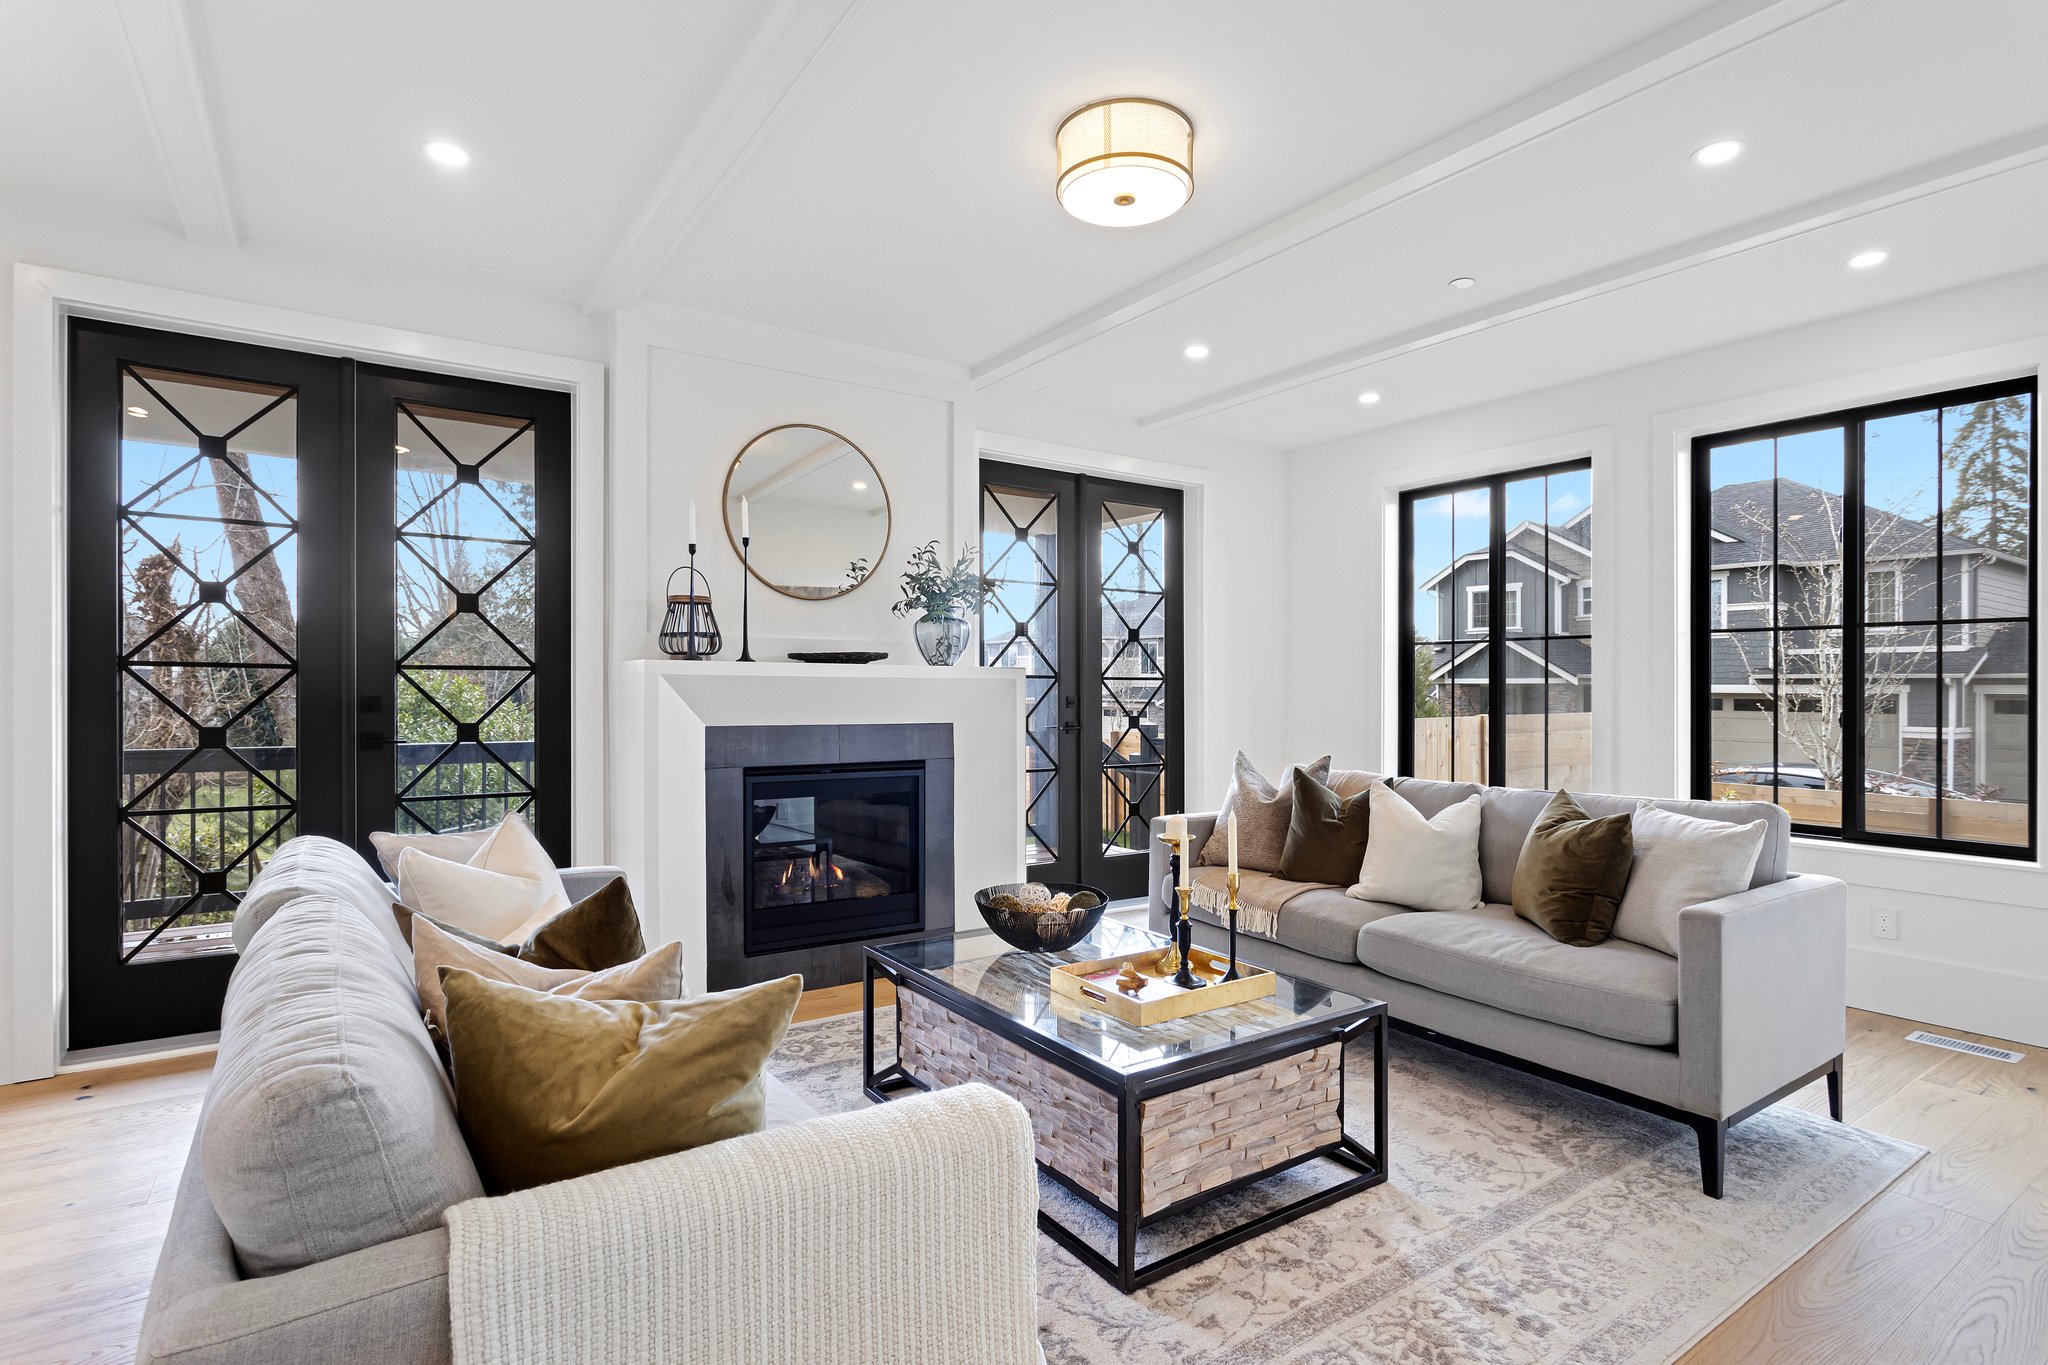 Living Room: Gas Fireplace, French Doors